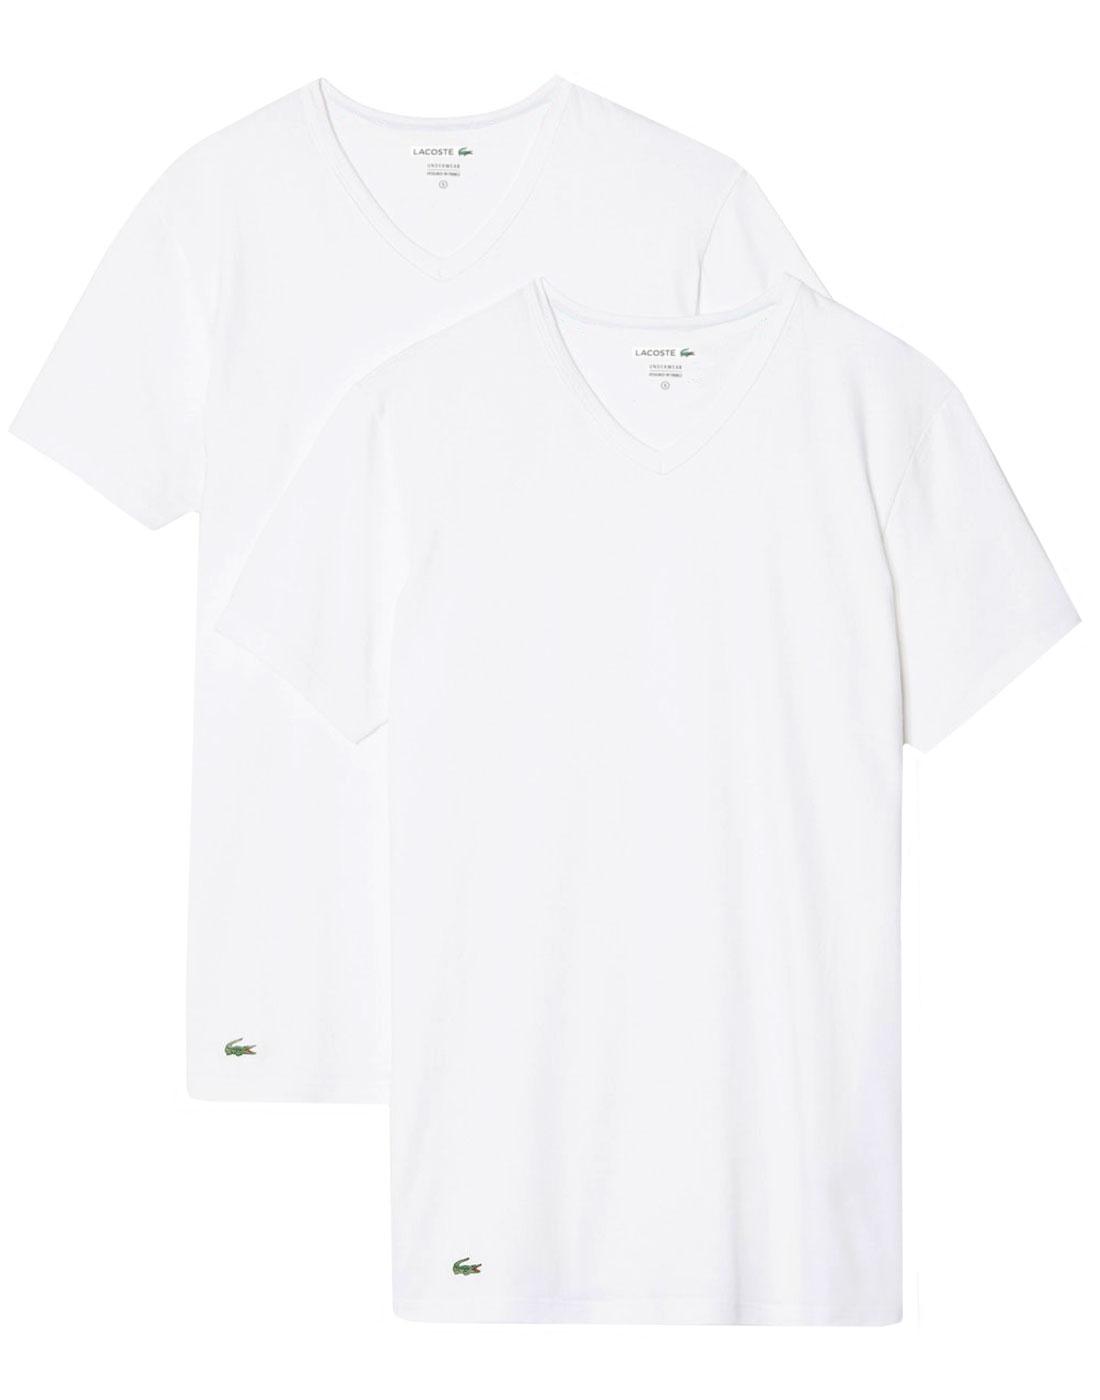 lacoste 2 pack t shirt